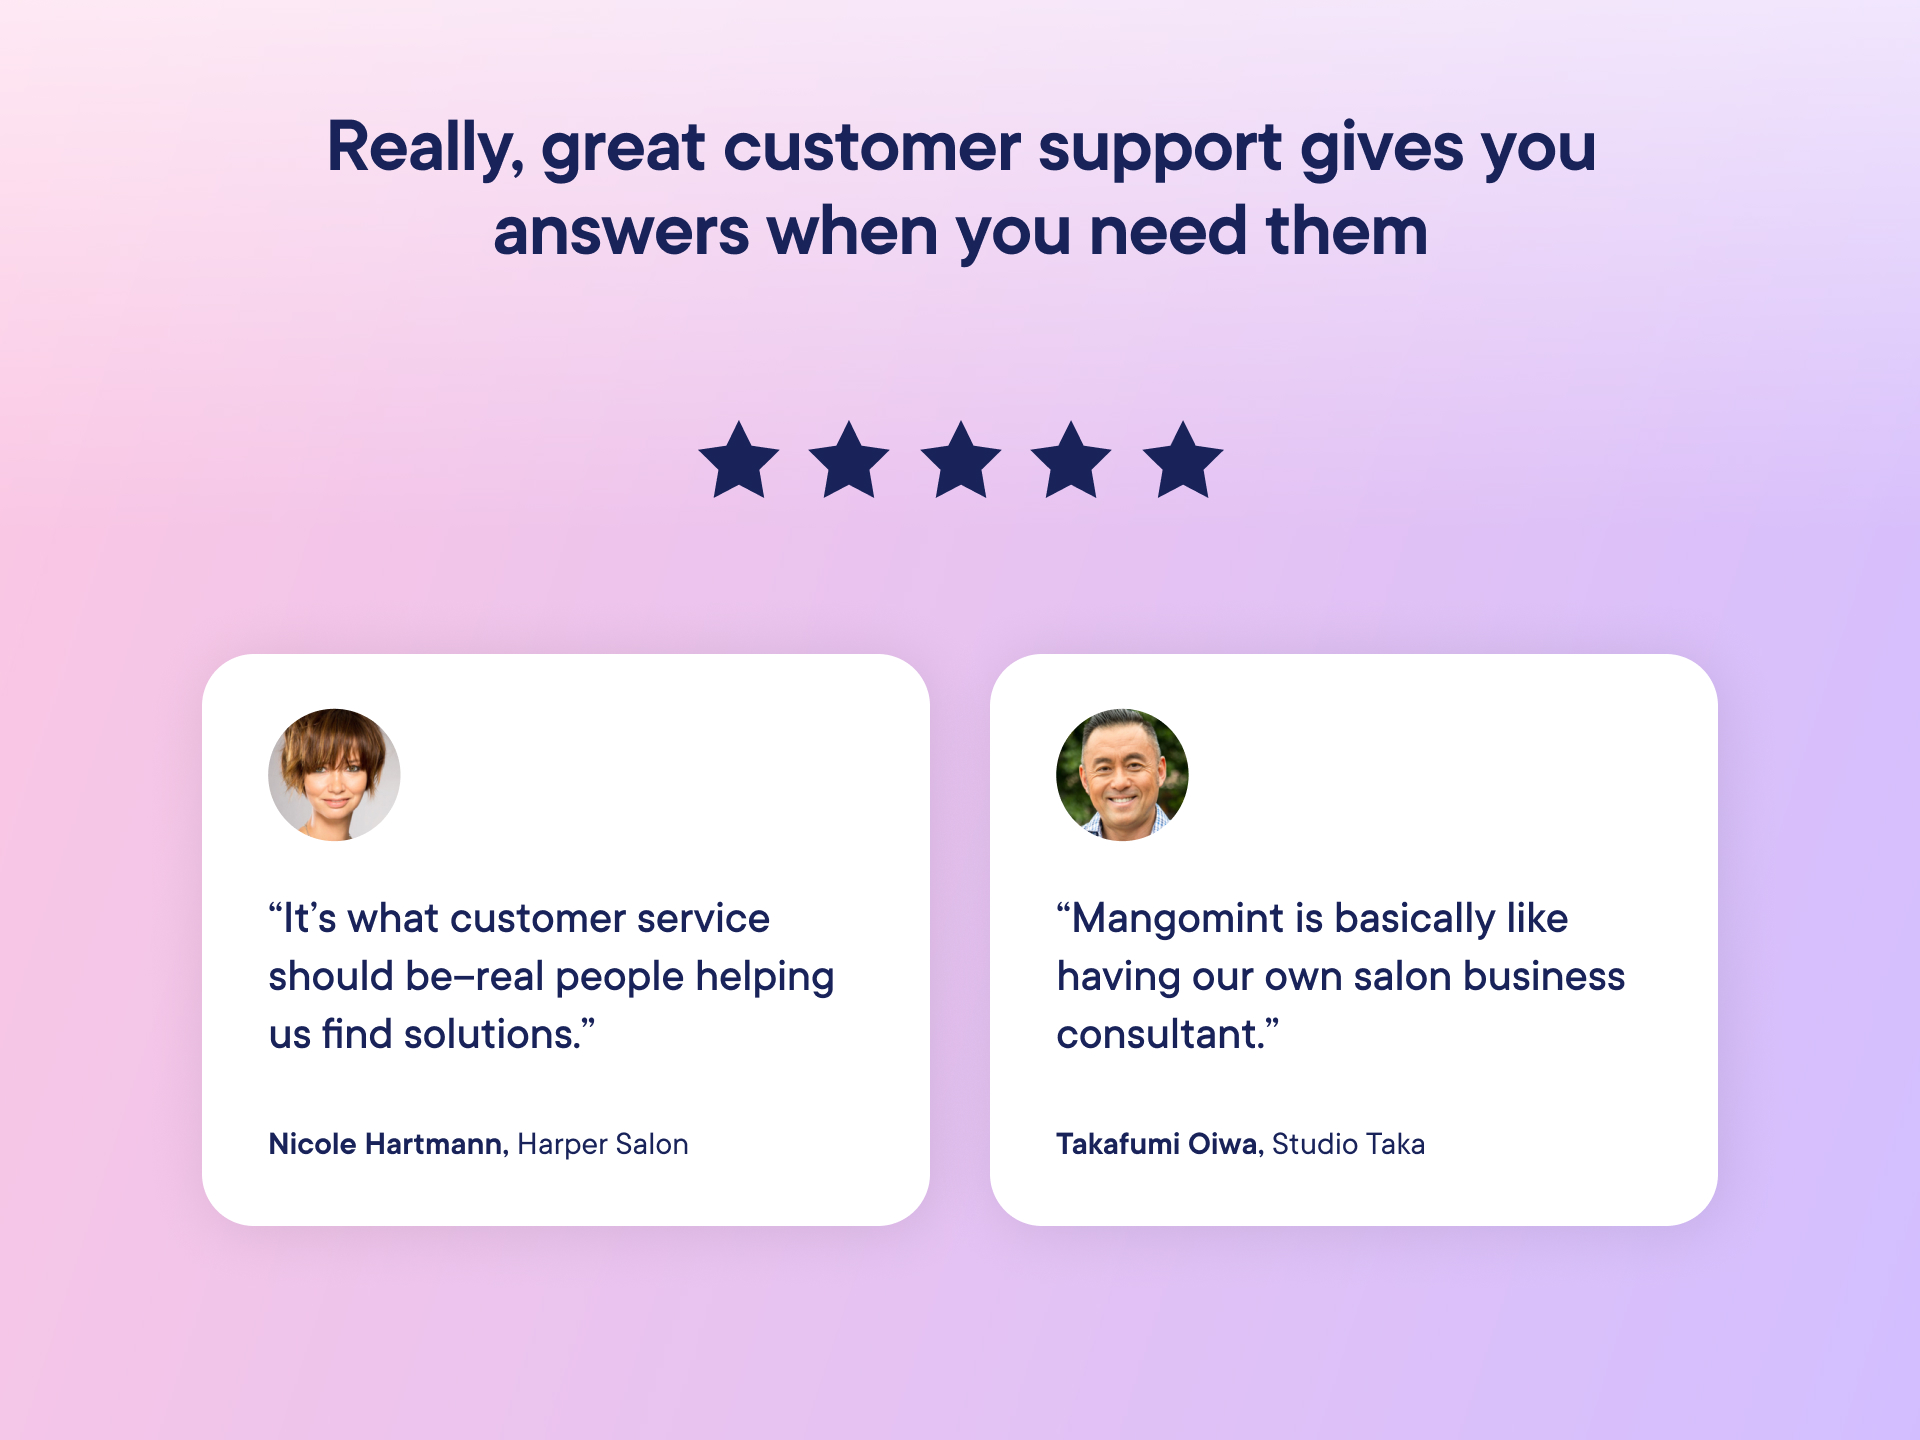 Really, really great customer support gives you answers when you need them.